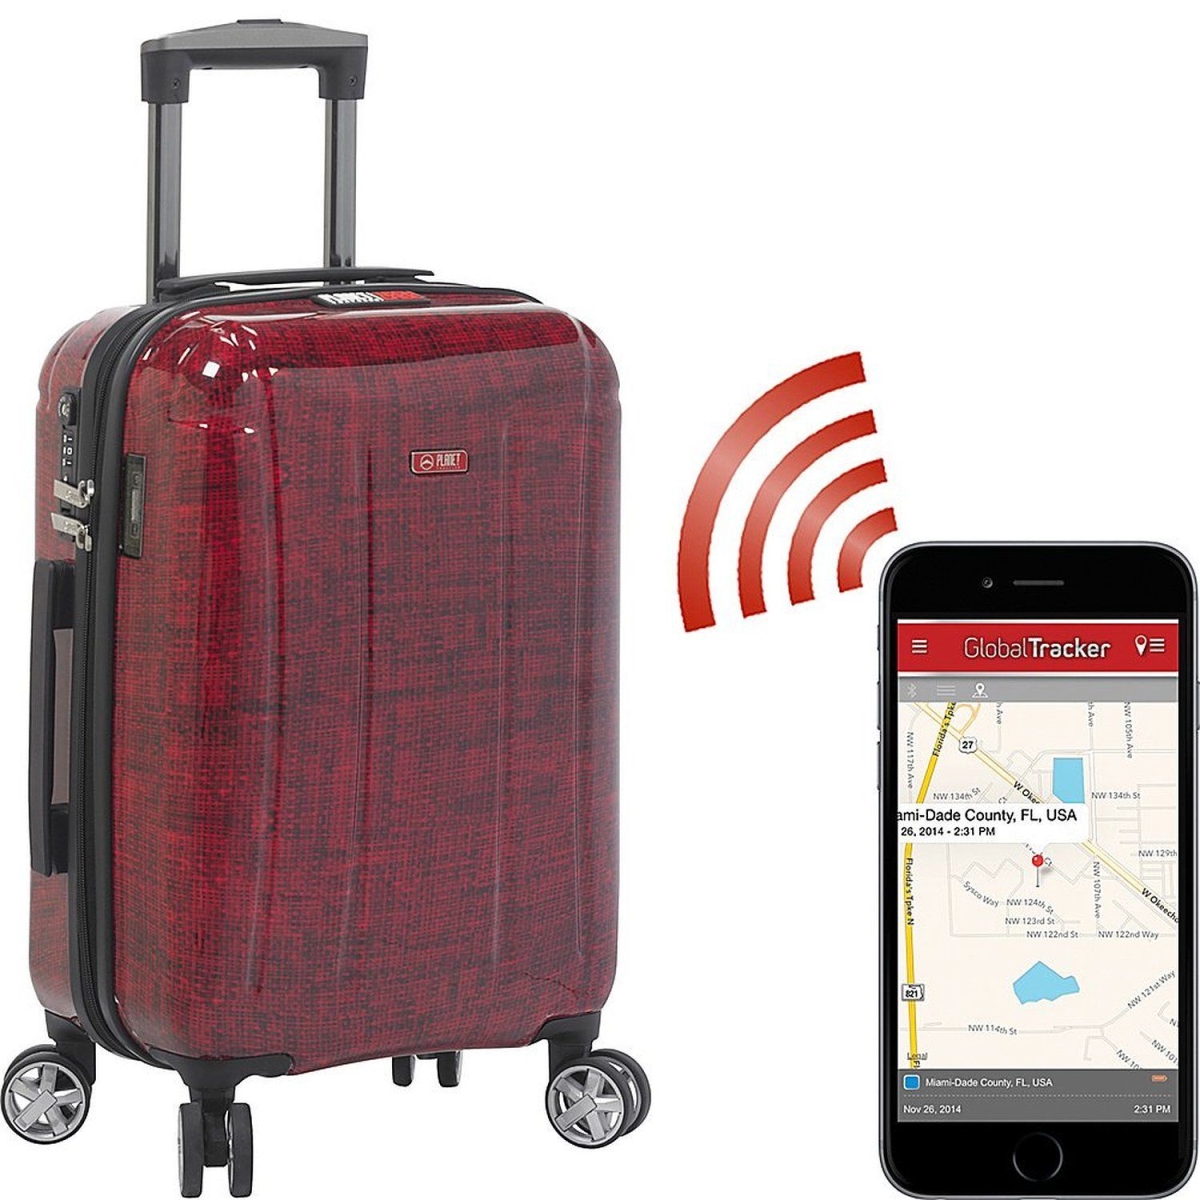 Pt004-23in-red Usa Smart Tech Case 23 In. - Red